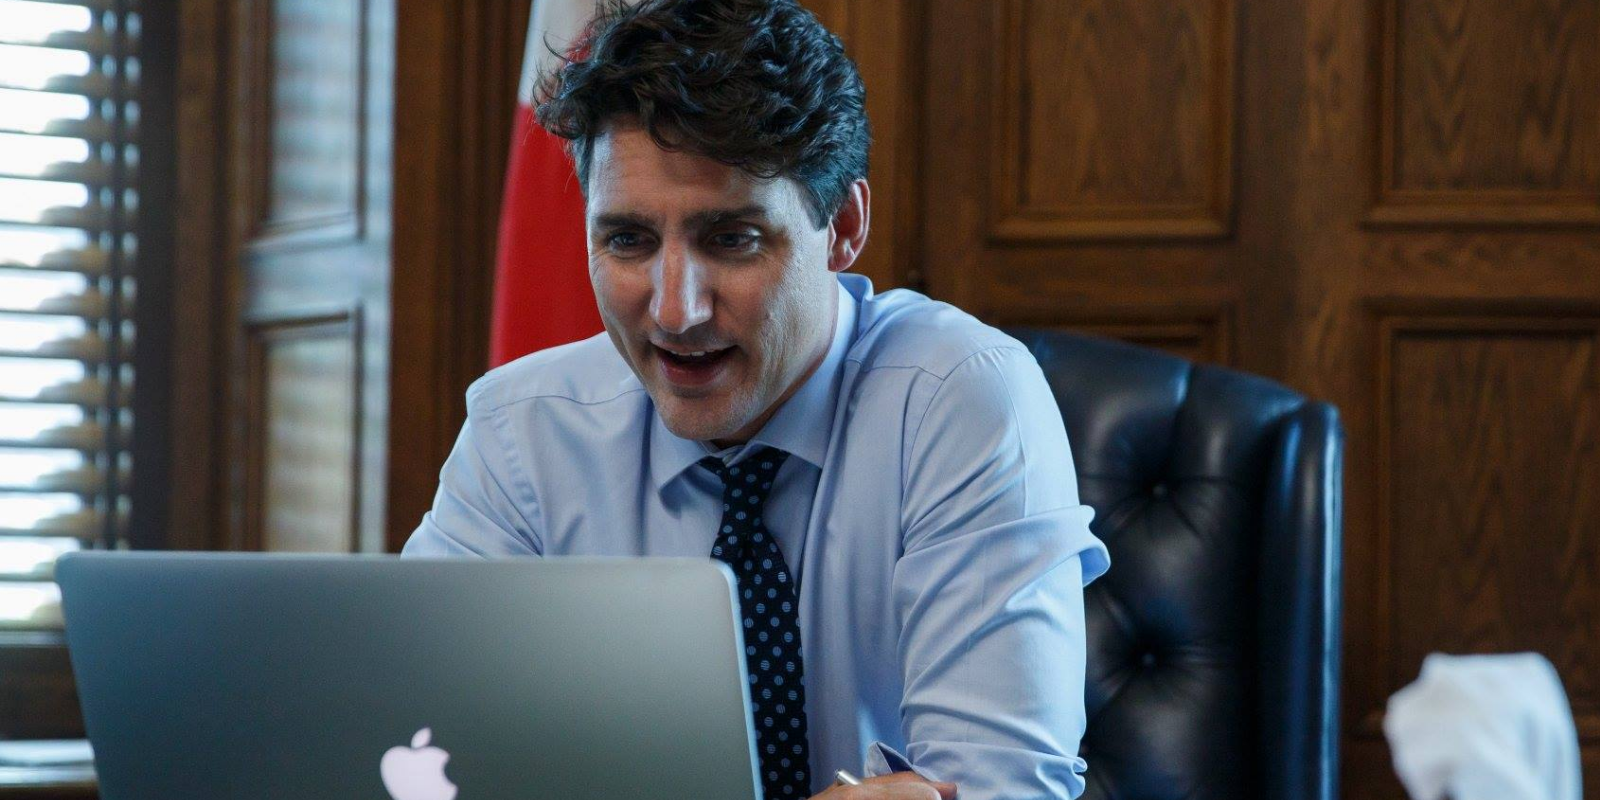 BREAKING: Trudeau Liberals push for 'mail-in voting' changes ahead of next election | The Post Millennial